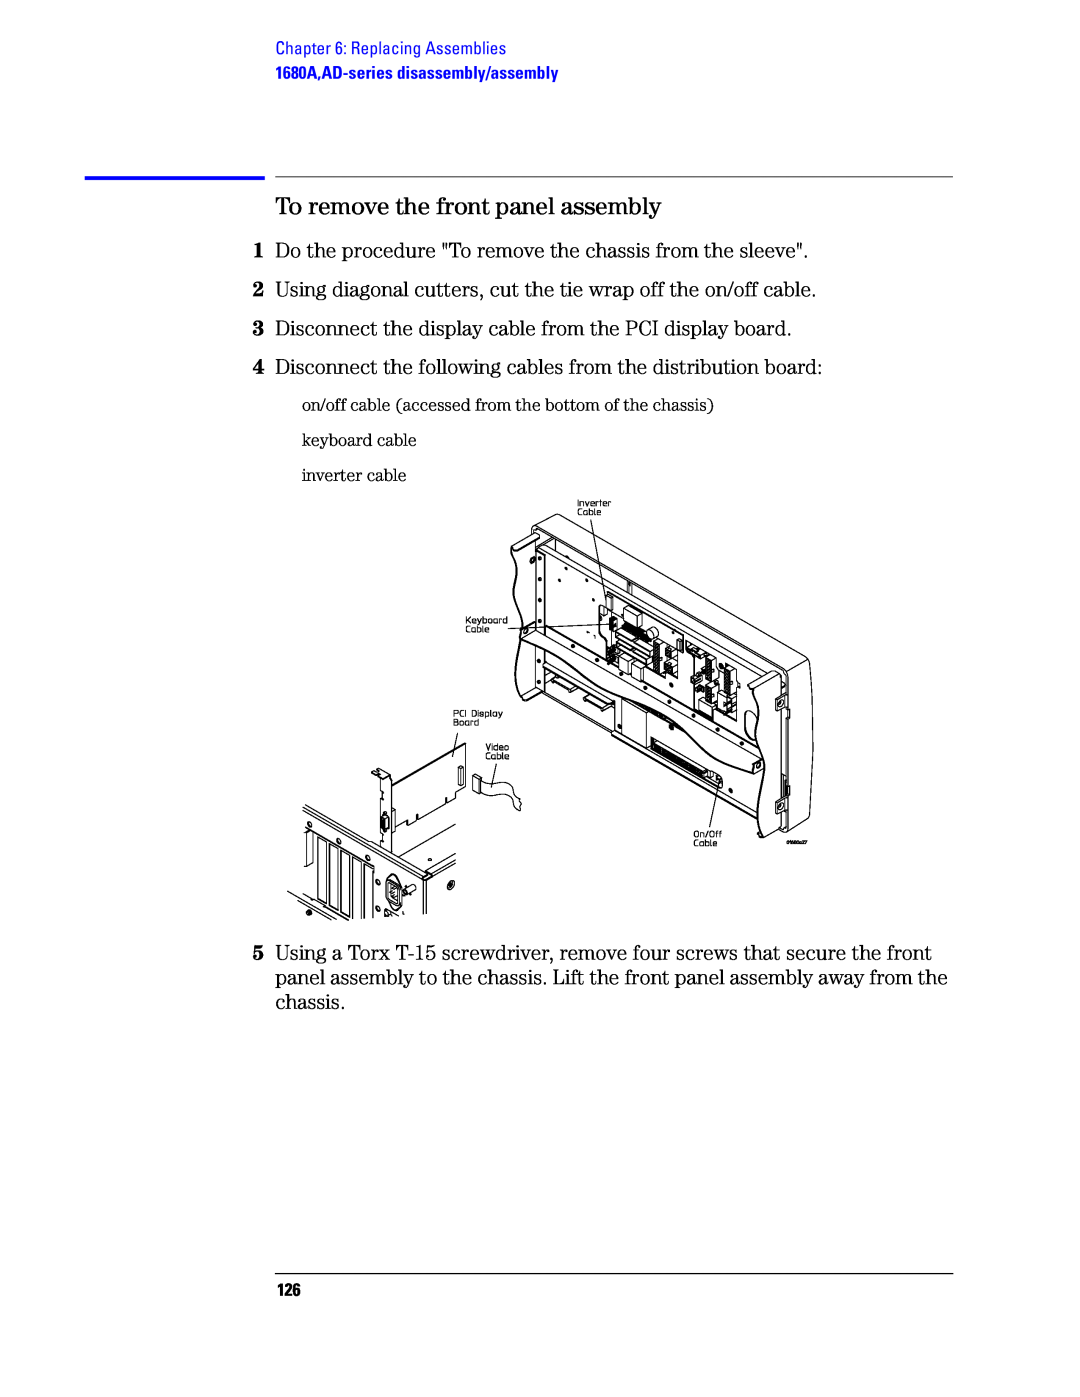 Agilent Technologies 1680, 1690 manual To remove the front panel assembly, inverter cable 